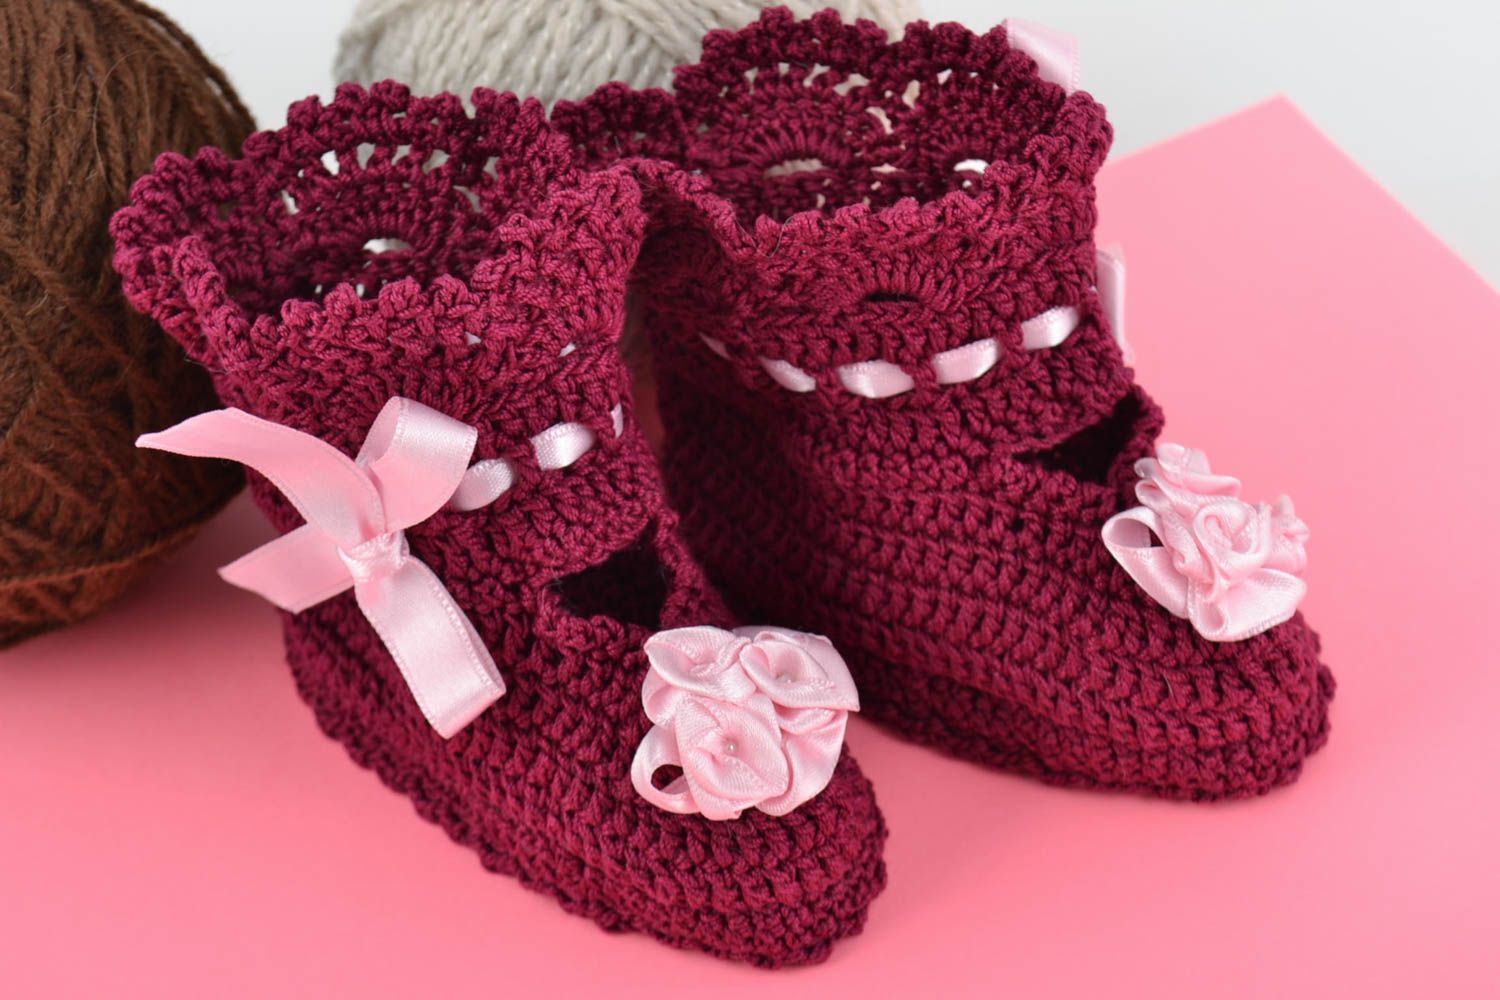 Handmade crocheted lacy baby booties of purple color with pink satin ribbons photo 1